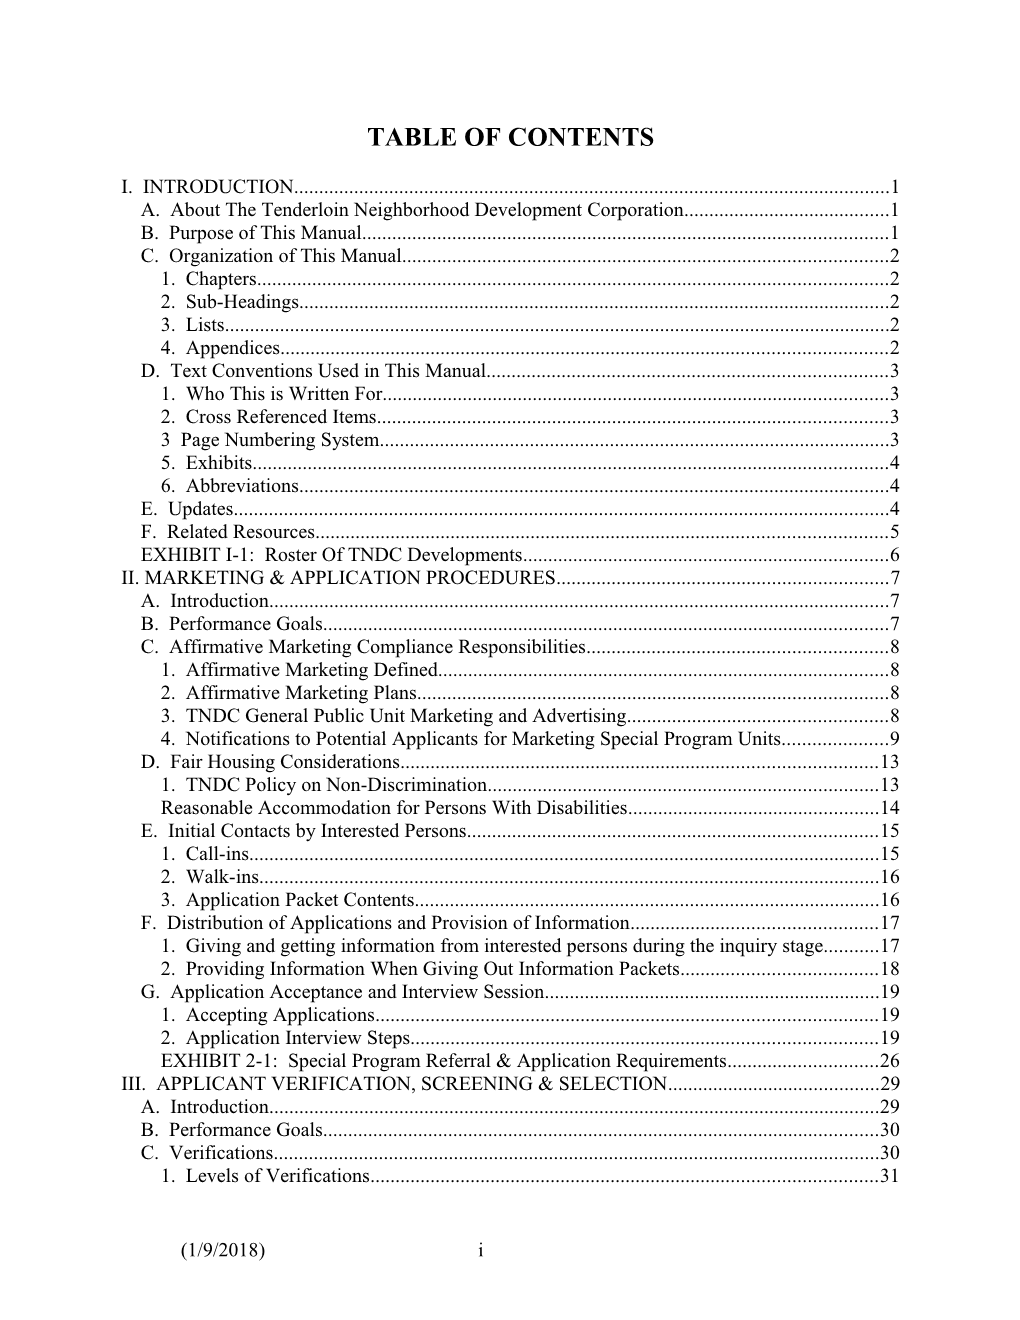 Table of Contents s31